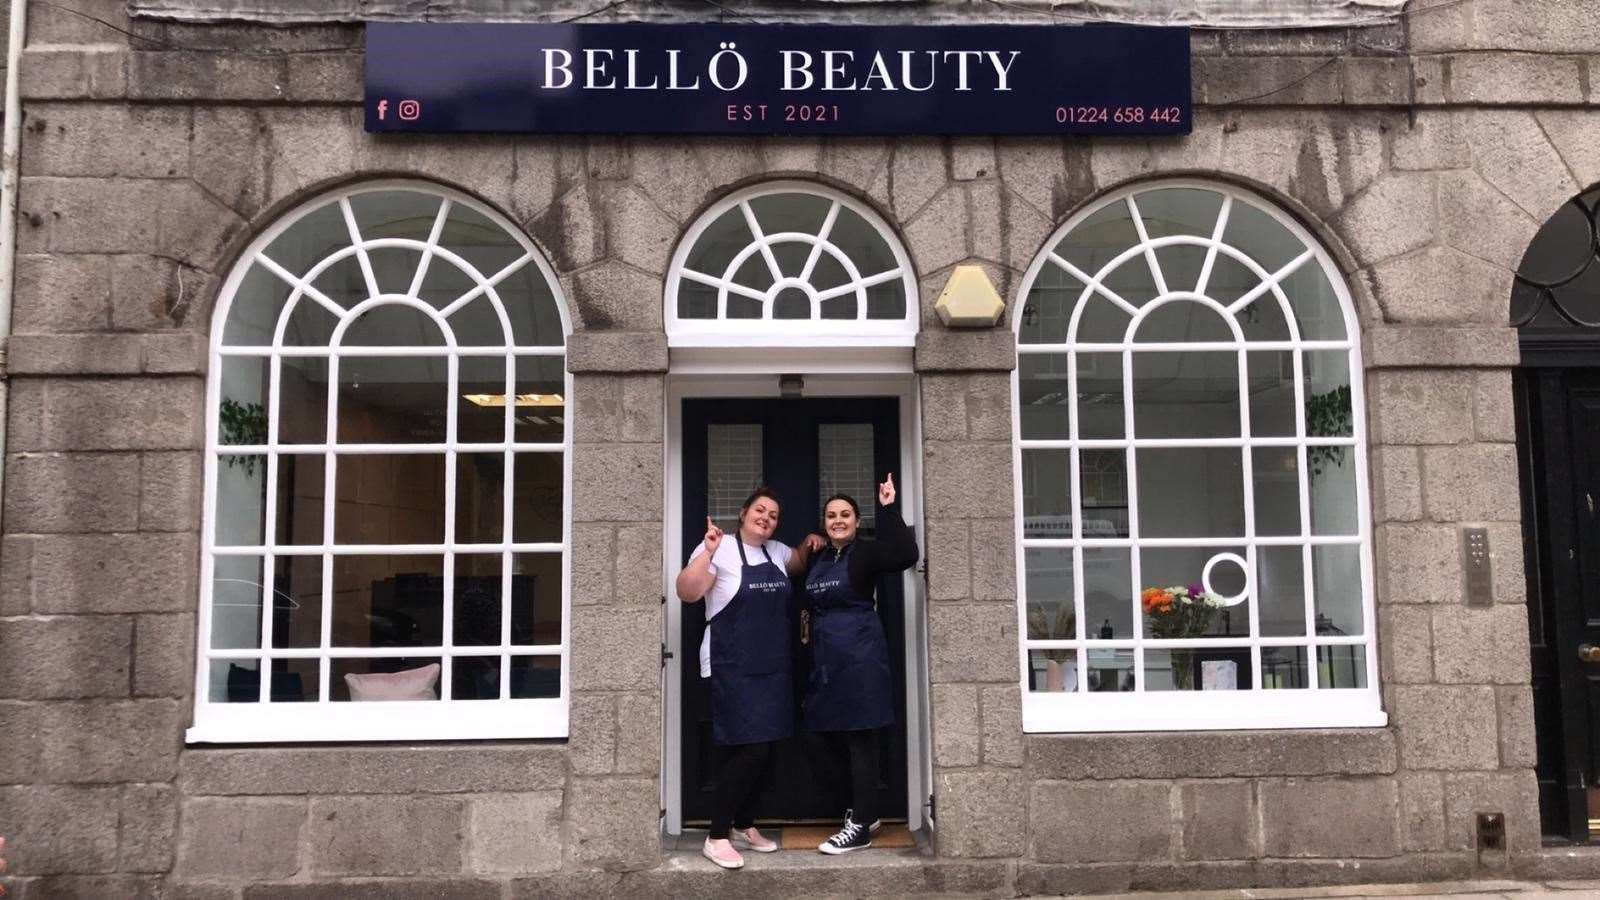 Carrie McRobb and Julie Gillan opened Bello Beauty a year ago.